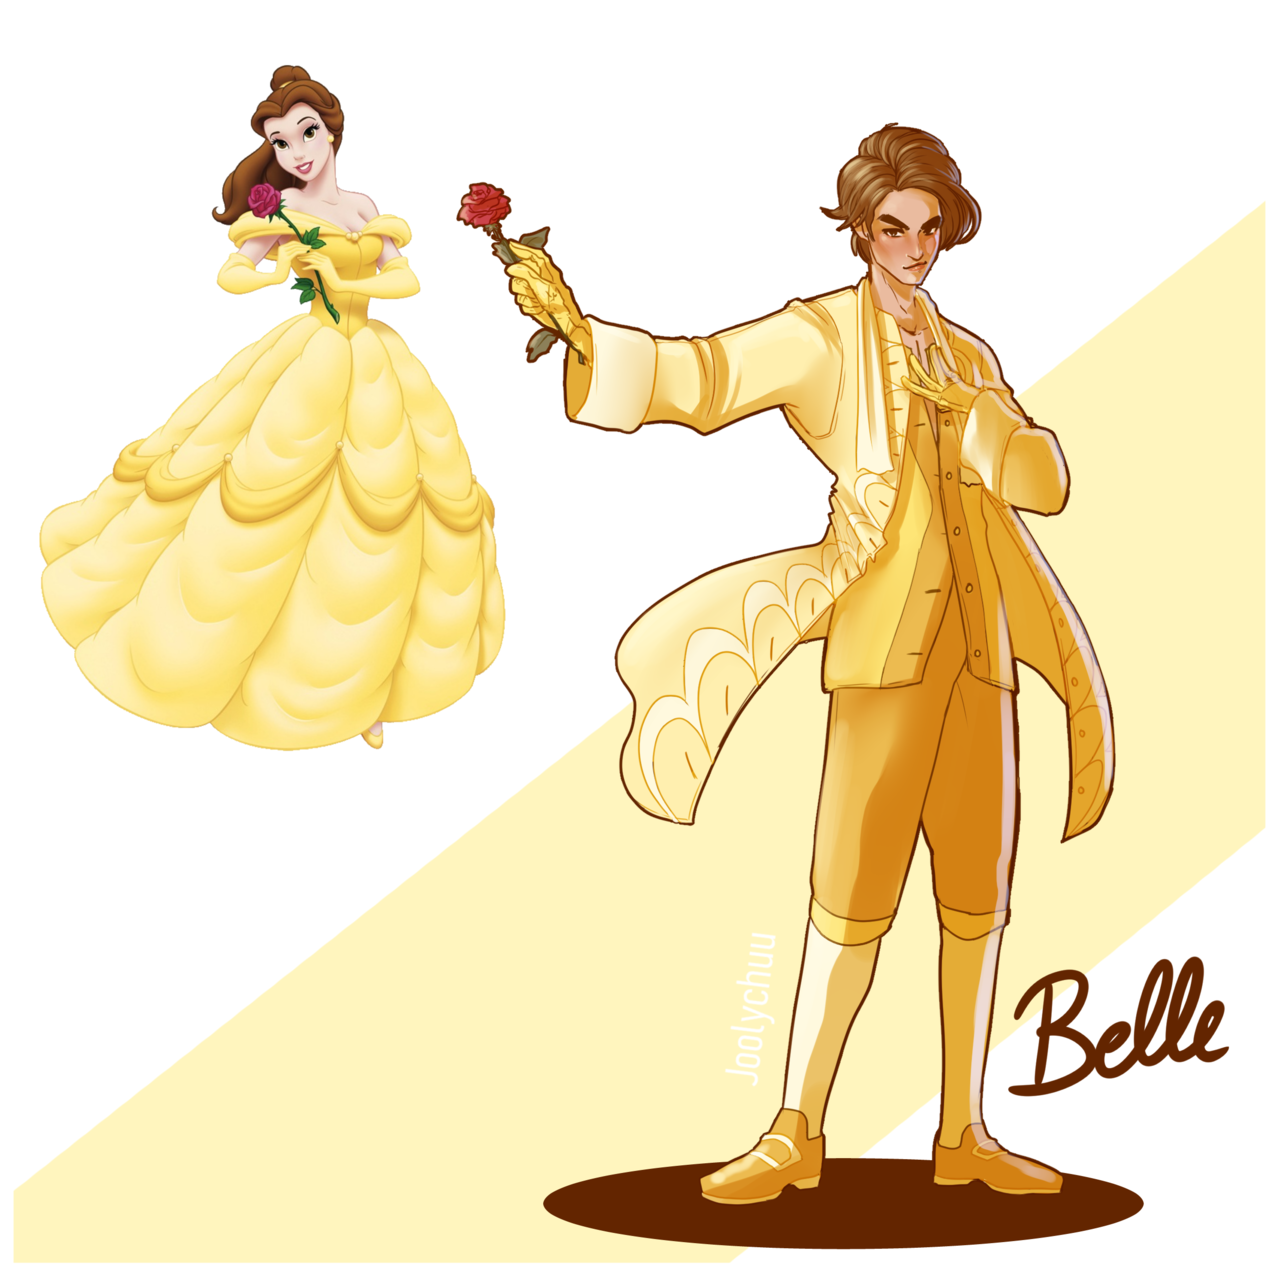 Genderbent beauty and the beast